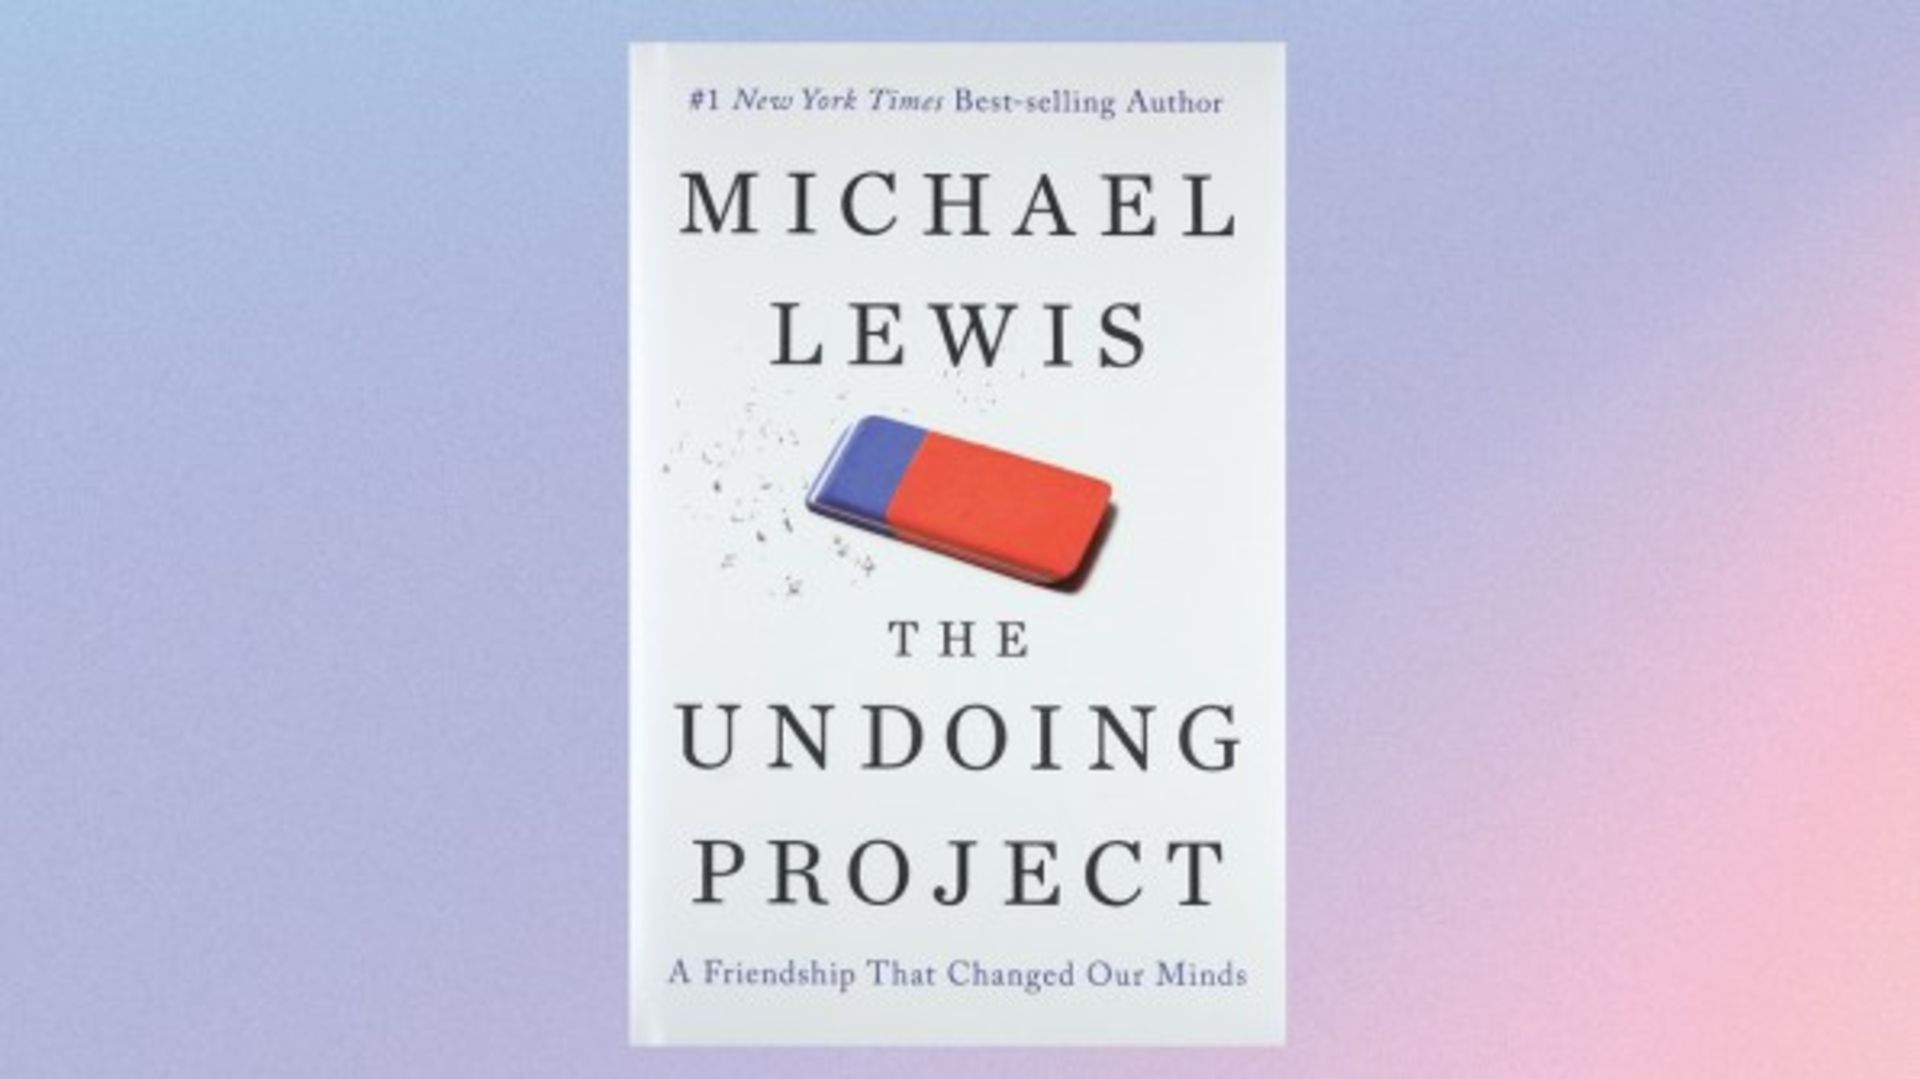 THE UNDOING PROJECT: A FRIENDSHIP THAT CHANGED OUR MINDS BY MICHAEL LEWIS